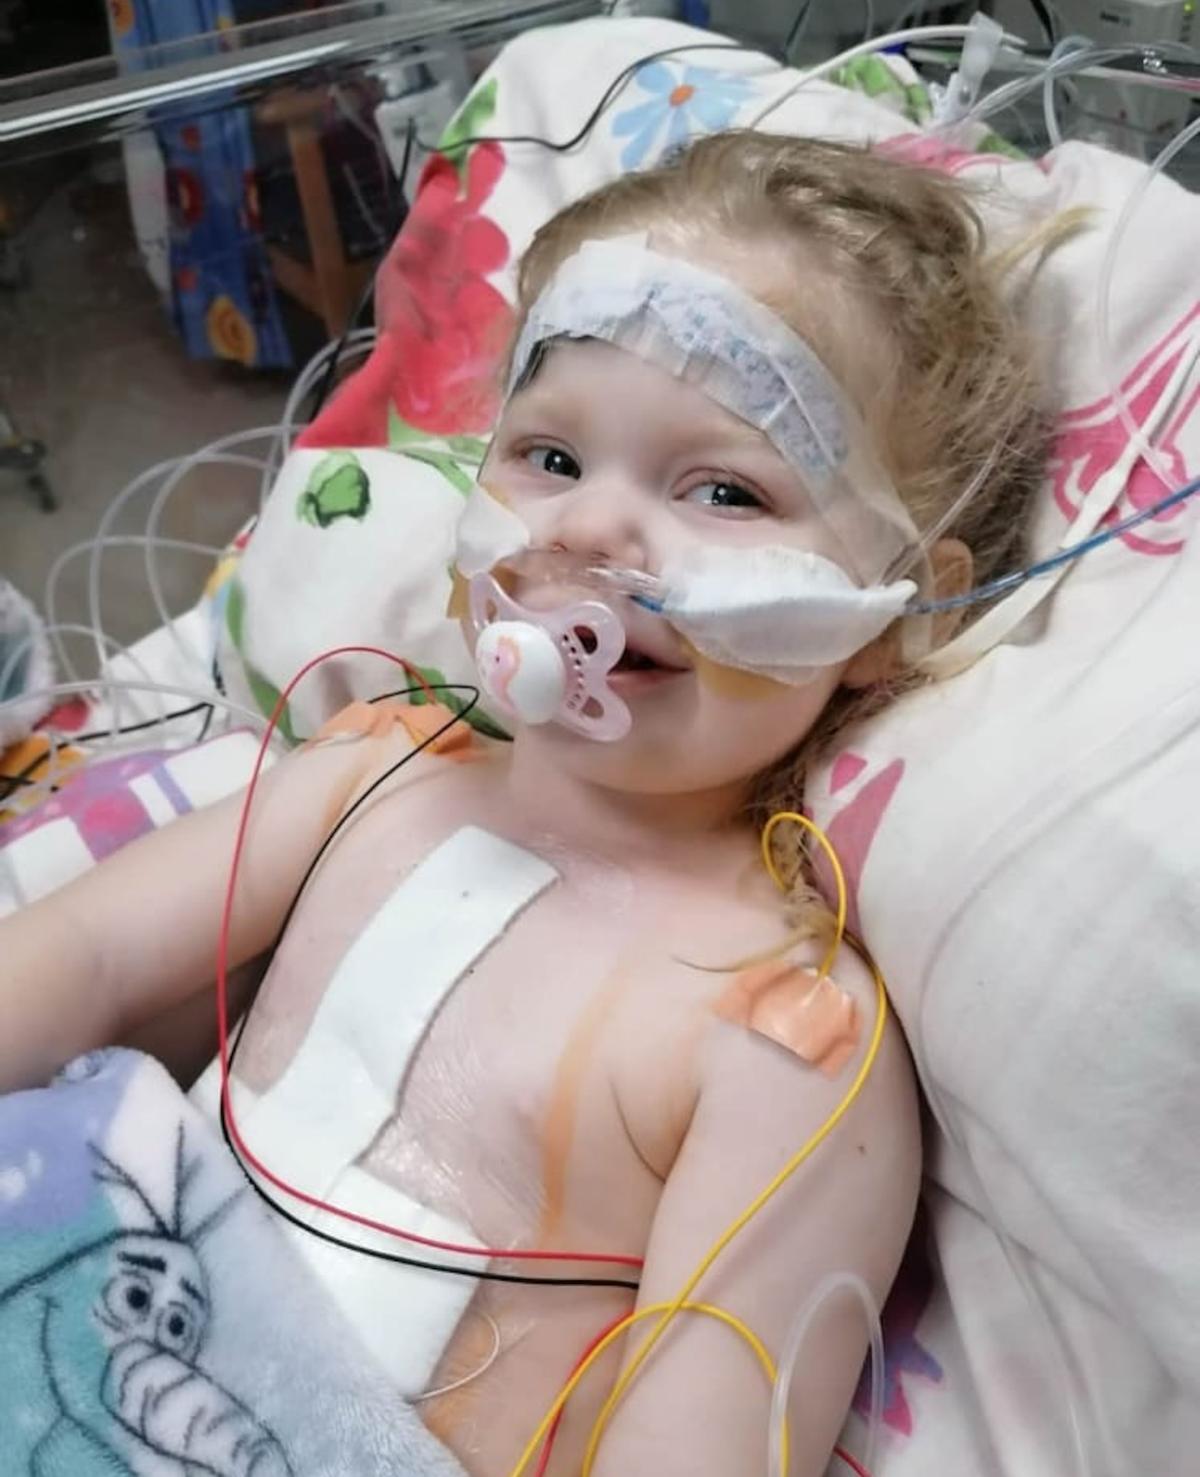 Lacey-Janet Ambler at her open-heart surgery in April. (Caters News)